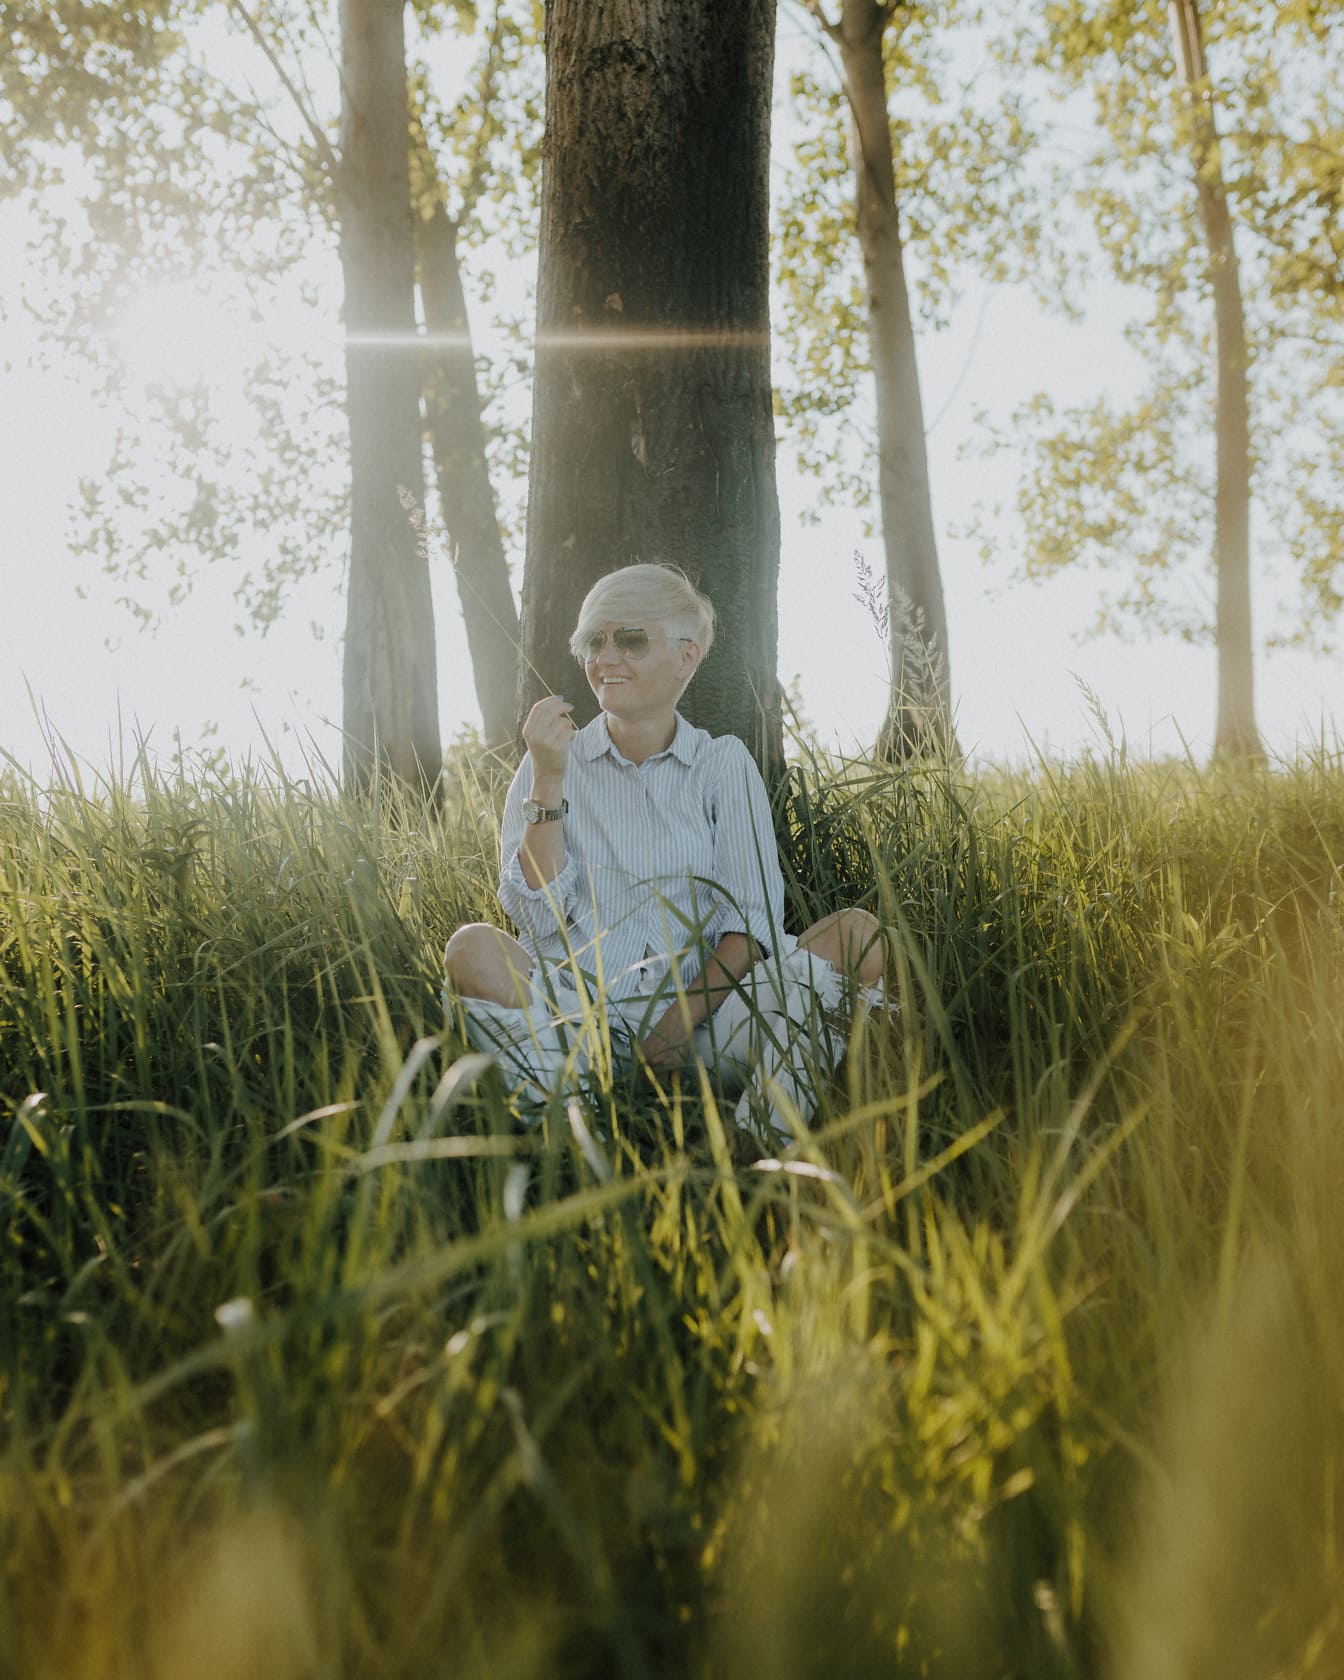 Blonde sitting in grassy meadow and smiling with sunrays in background